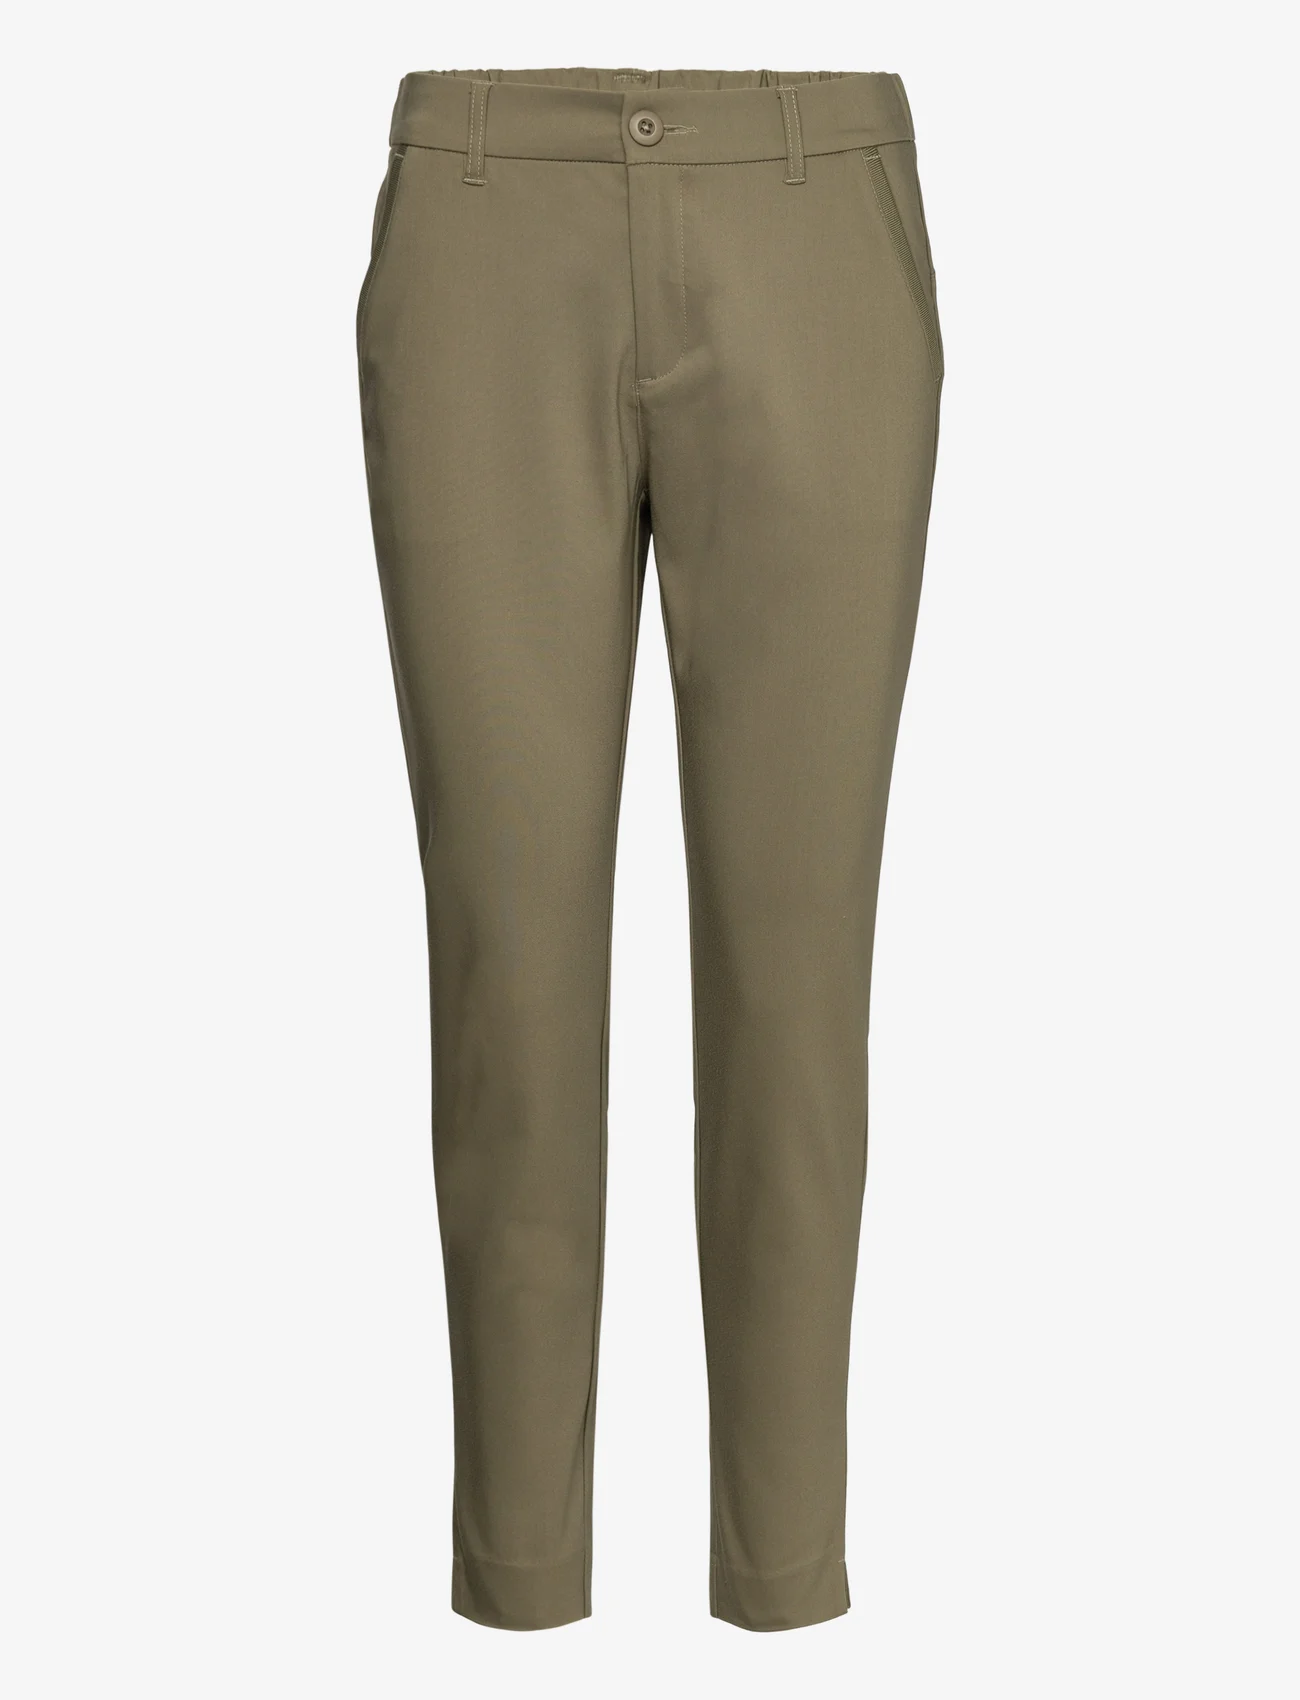 Culture - CUalpha Pants - slim fit trousers - burnt olive - 0